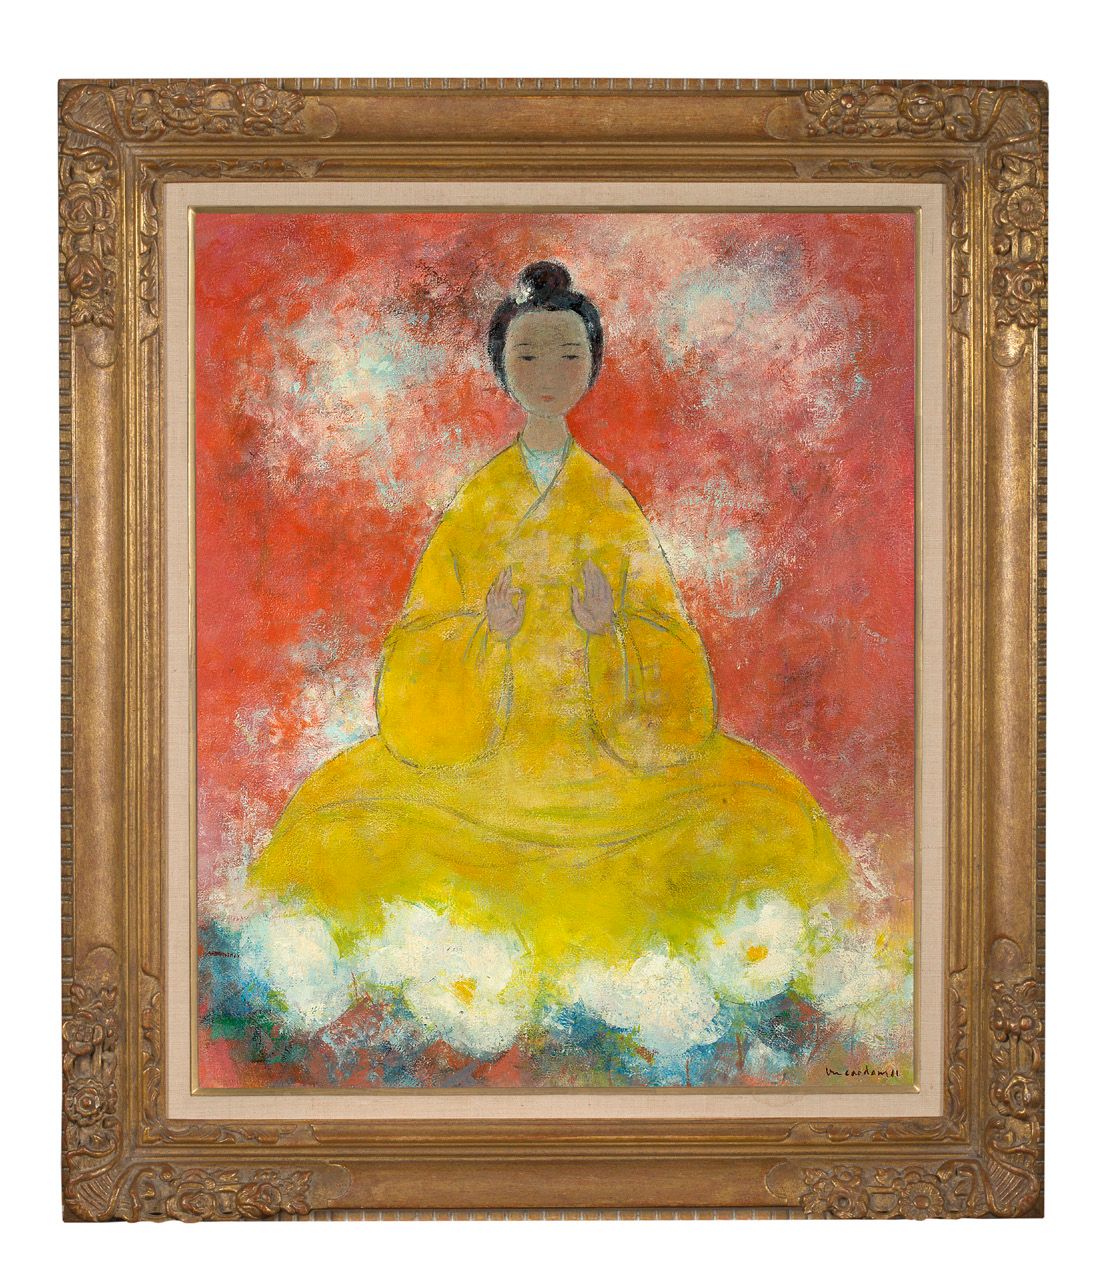 VŨ CAO ĐÀM (1908-2000) Divinité, 1981
Oil on canvas, signed and dated lower righ&hellip;